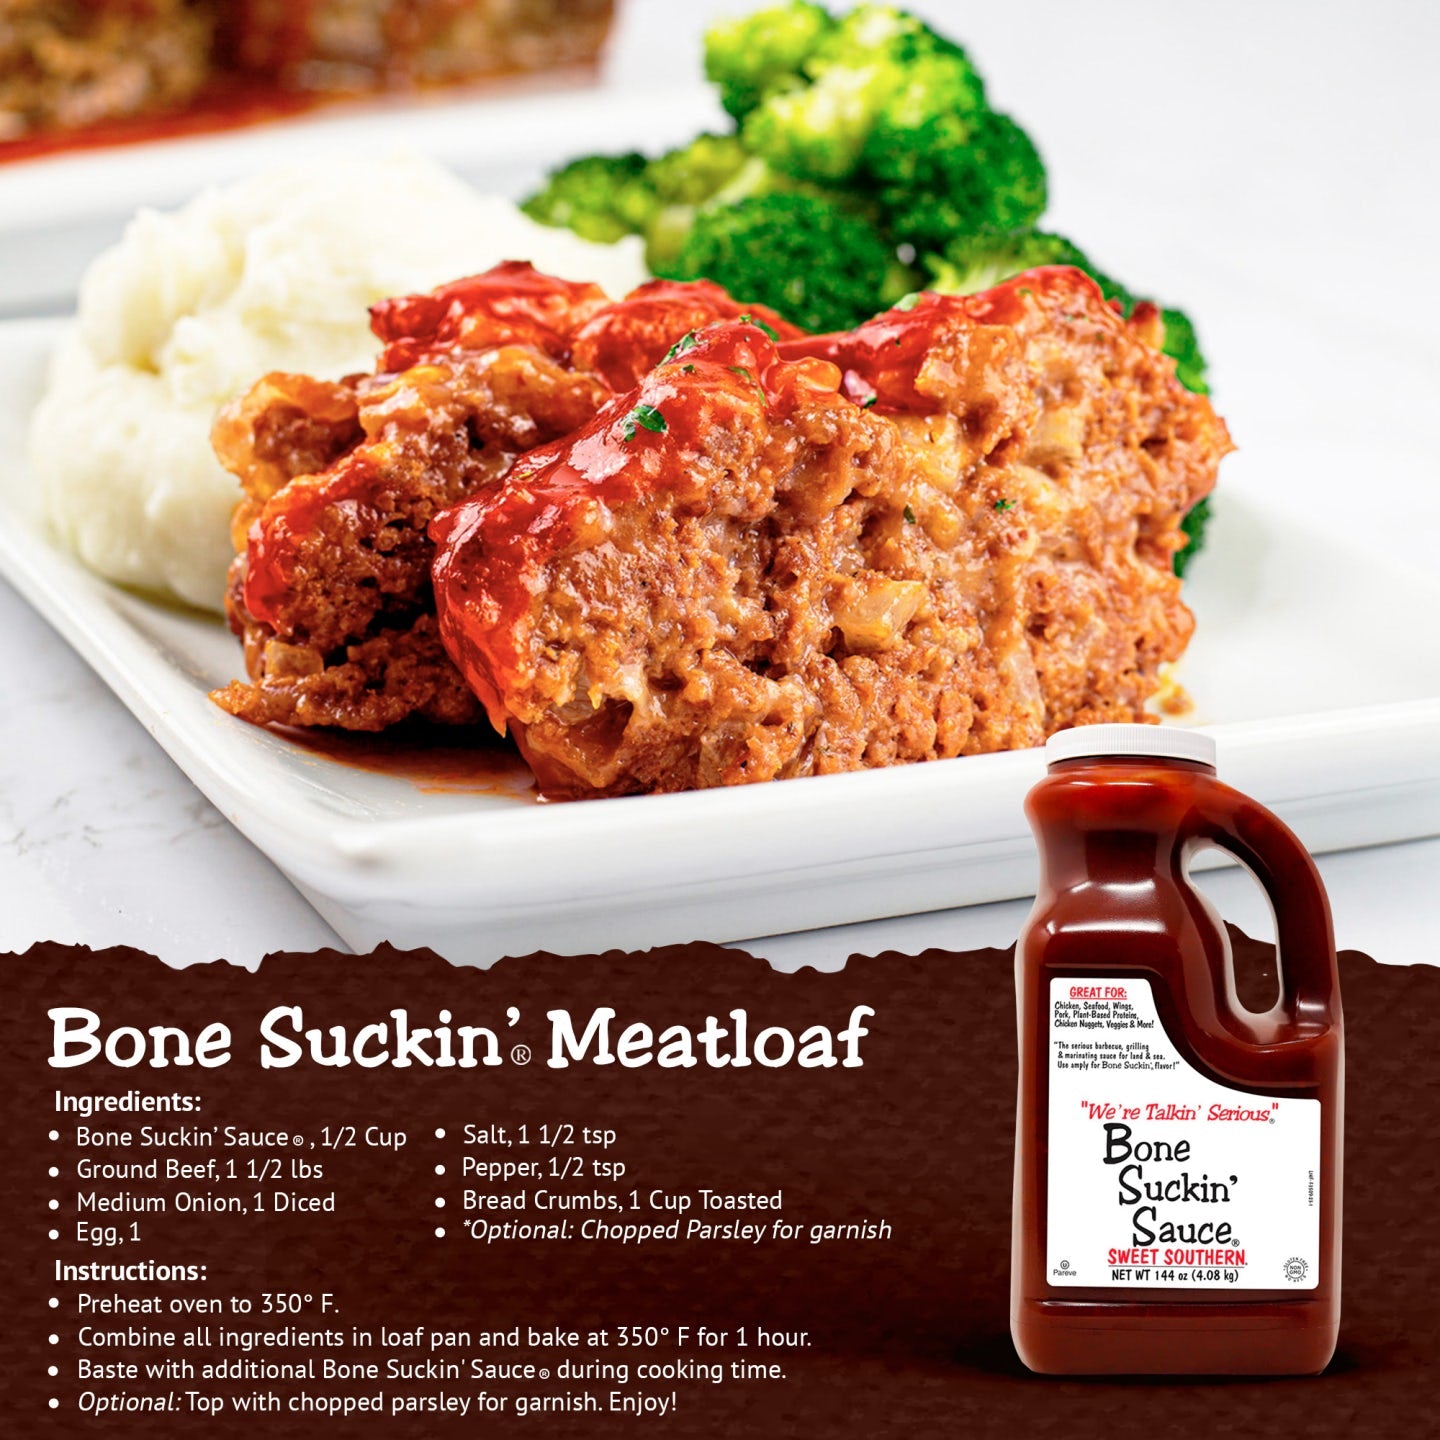 Bone Suckin'® Meatloaf Recipe. Ingredients: Bone Suckin' Sauce, 1/2 cup. Ground beef, 1 1/2 lbs. Medium onion, 1 diced. Egg, 1. Salt, 1 1/2 tsp. Pepper, 1/2 tsp. Bread crumbs, 1 cup toasted. Optional: chopped parsley for garnish. Instructions: Preheat oven to 350 F. Combine all ingredients in loaf pan and bake at 350 F for 1 hour. Baste with additional Bone Suckin' Sauce during cooking time. Optional: Top with chopped parsley for garnish. Enjoy!